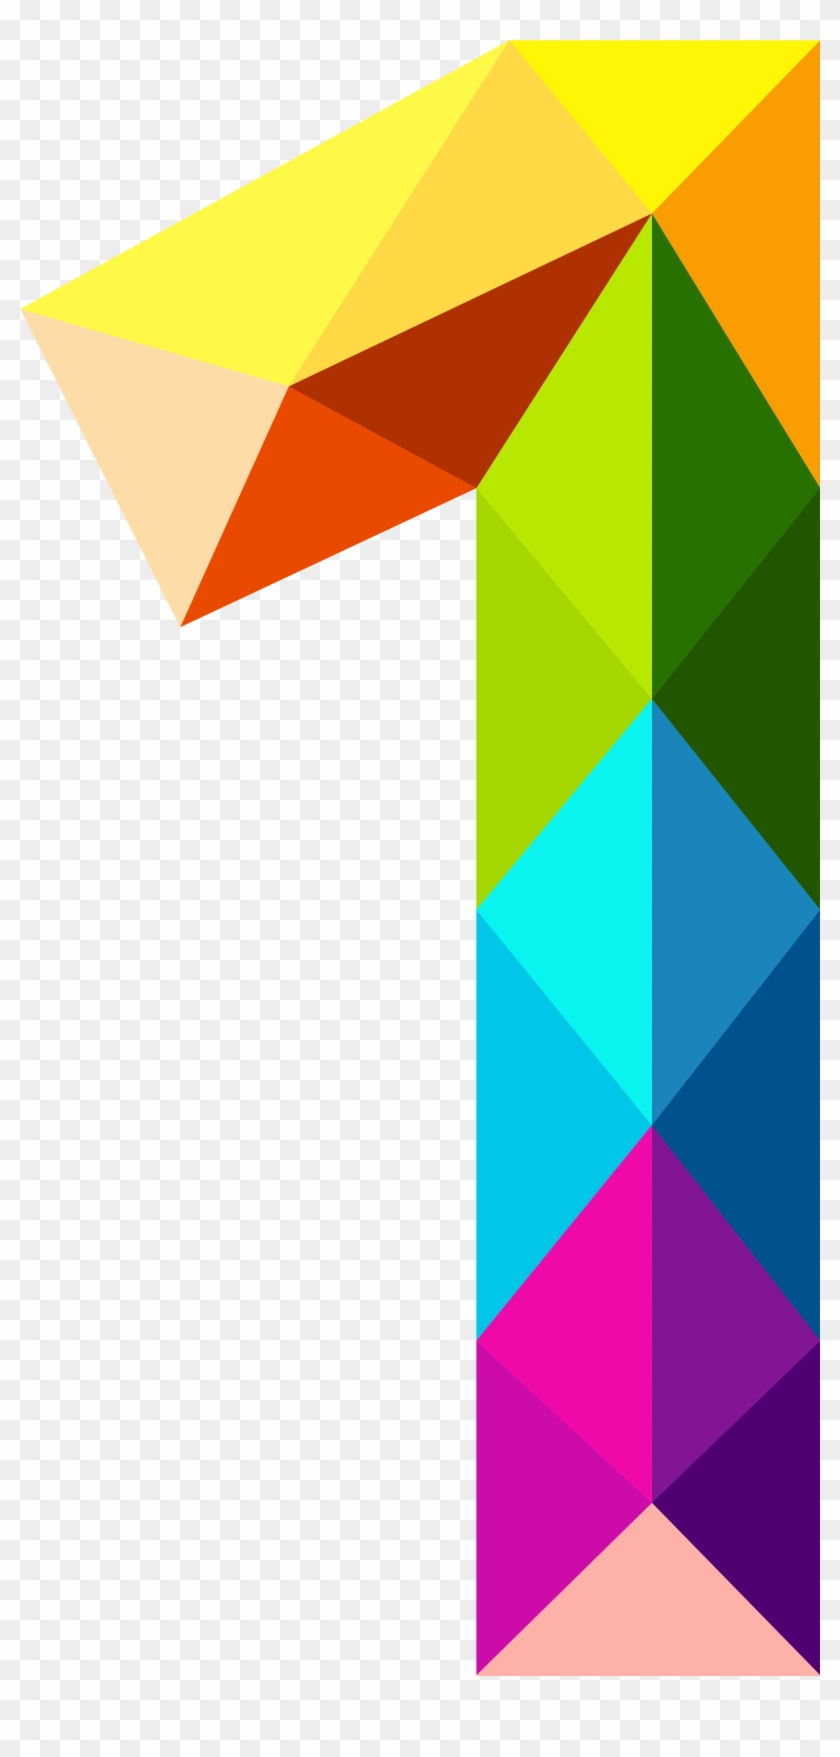 Colourful Triangles Number One Png Clipart Image - Colourful Triangles Number One Png Transparent Png #377375